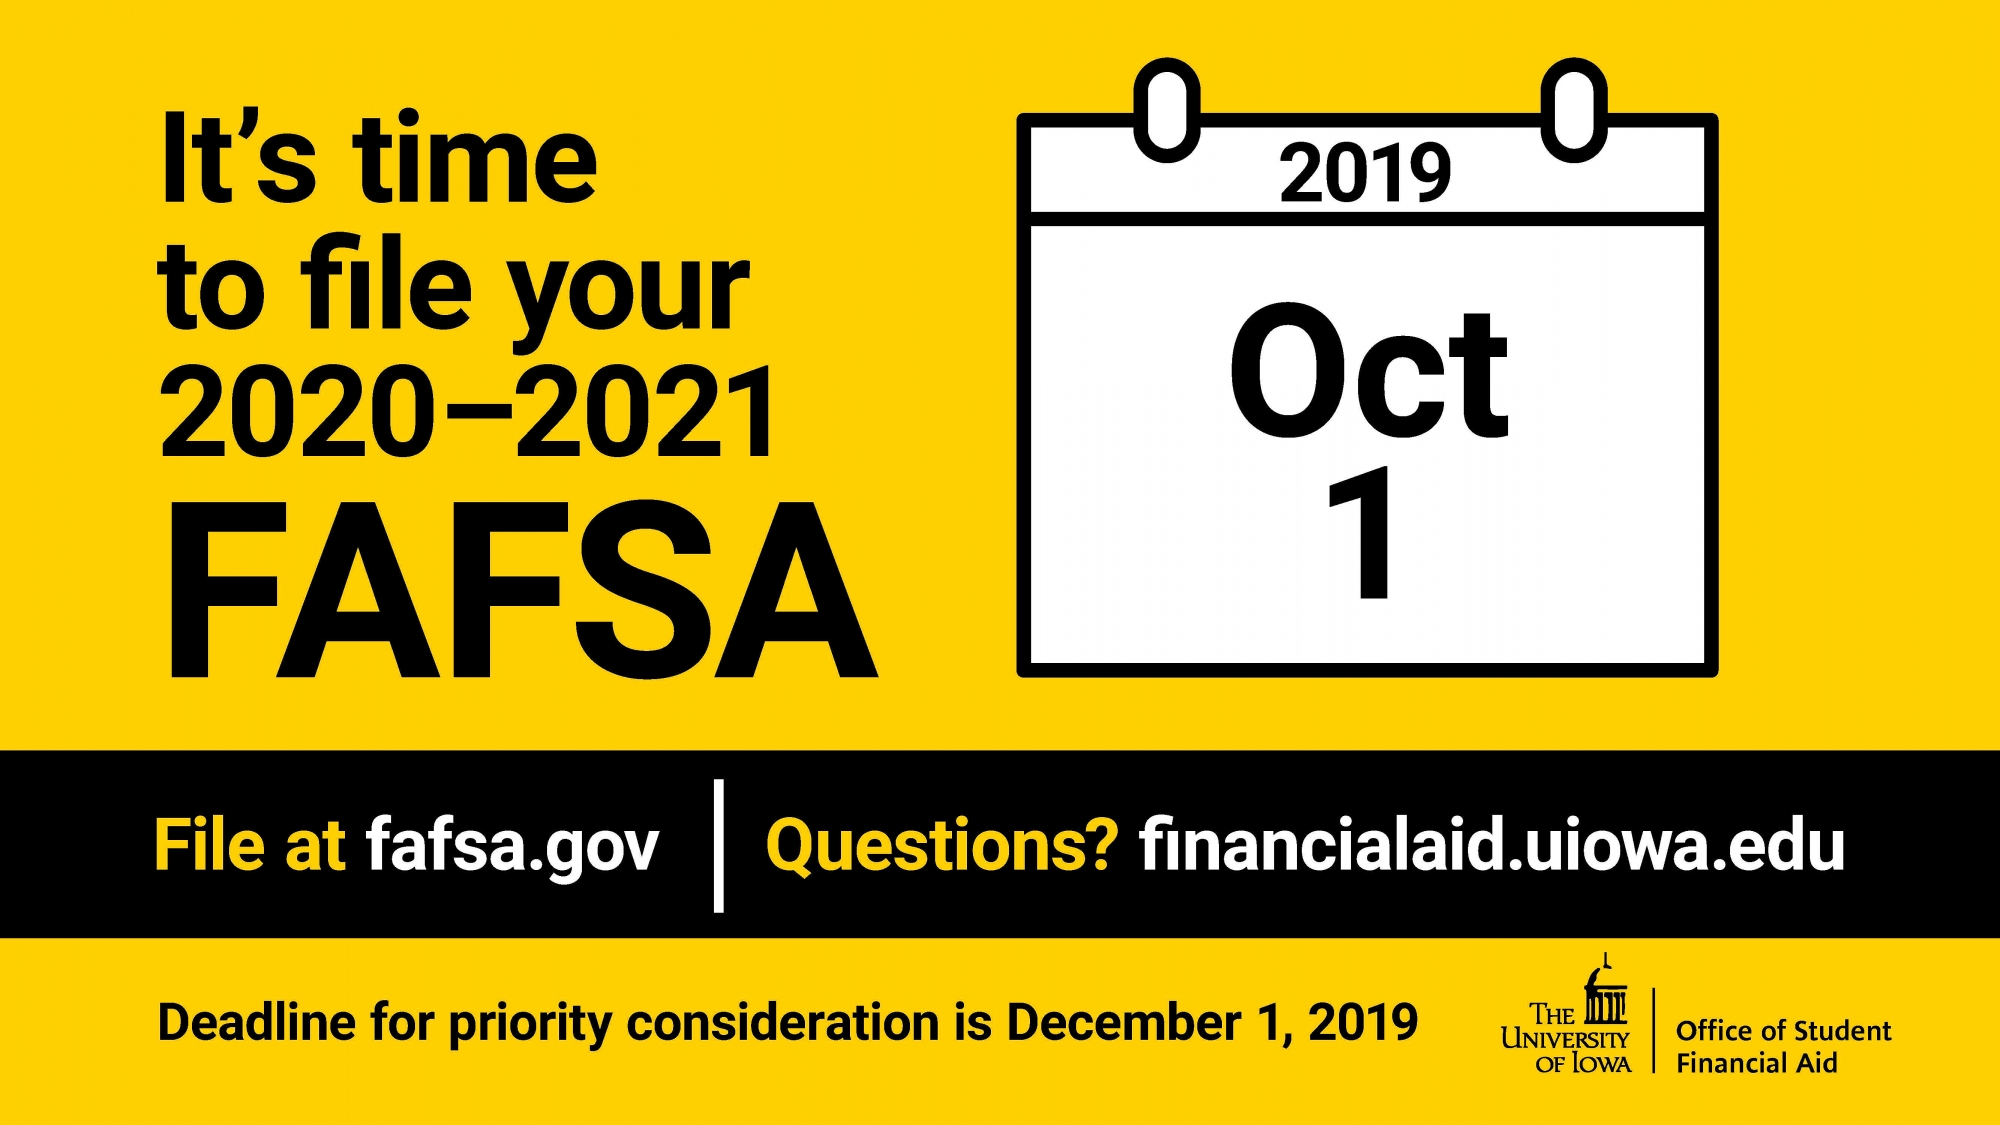 File your FAFSA